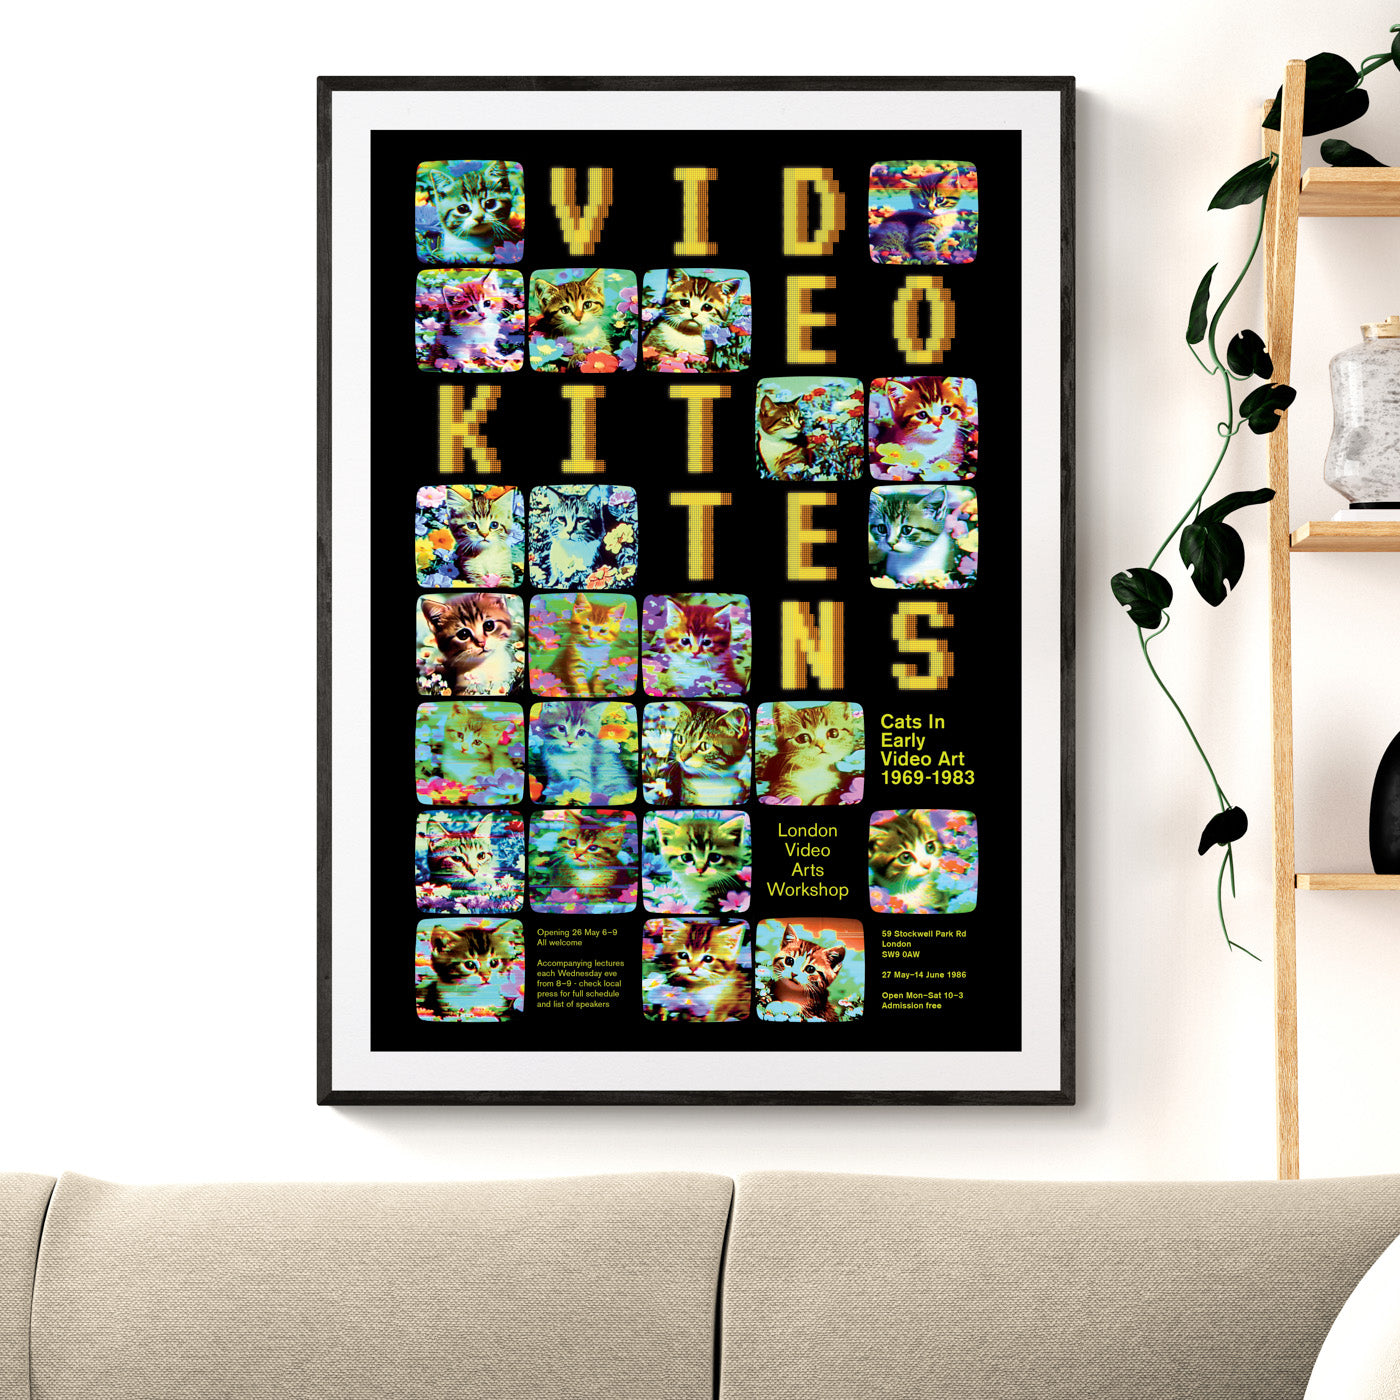 Retro styled poster 'Video Kittens - Cats in Early Video Art 1969-1983' featuring glitchy images of cats in gardens